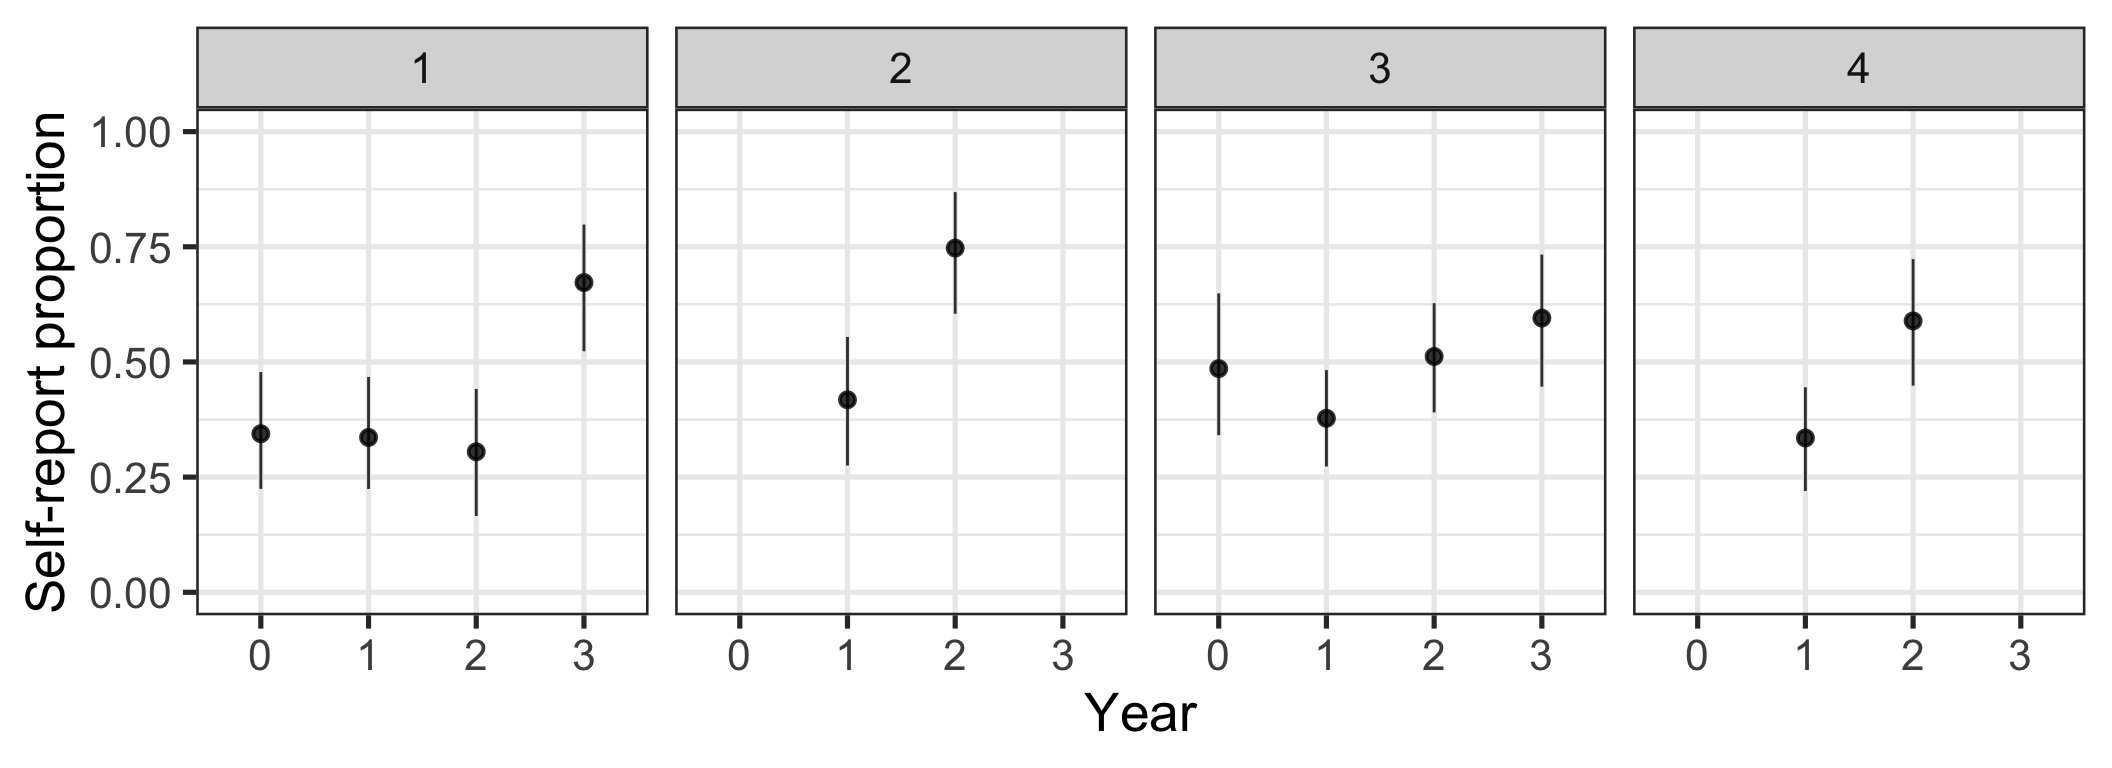 Change in proportion of studies that use only self-report over time by journal. Bootstrapped means and 95% CIs.